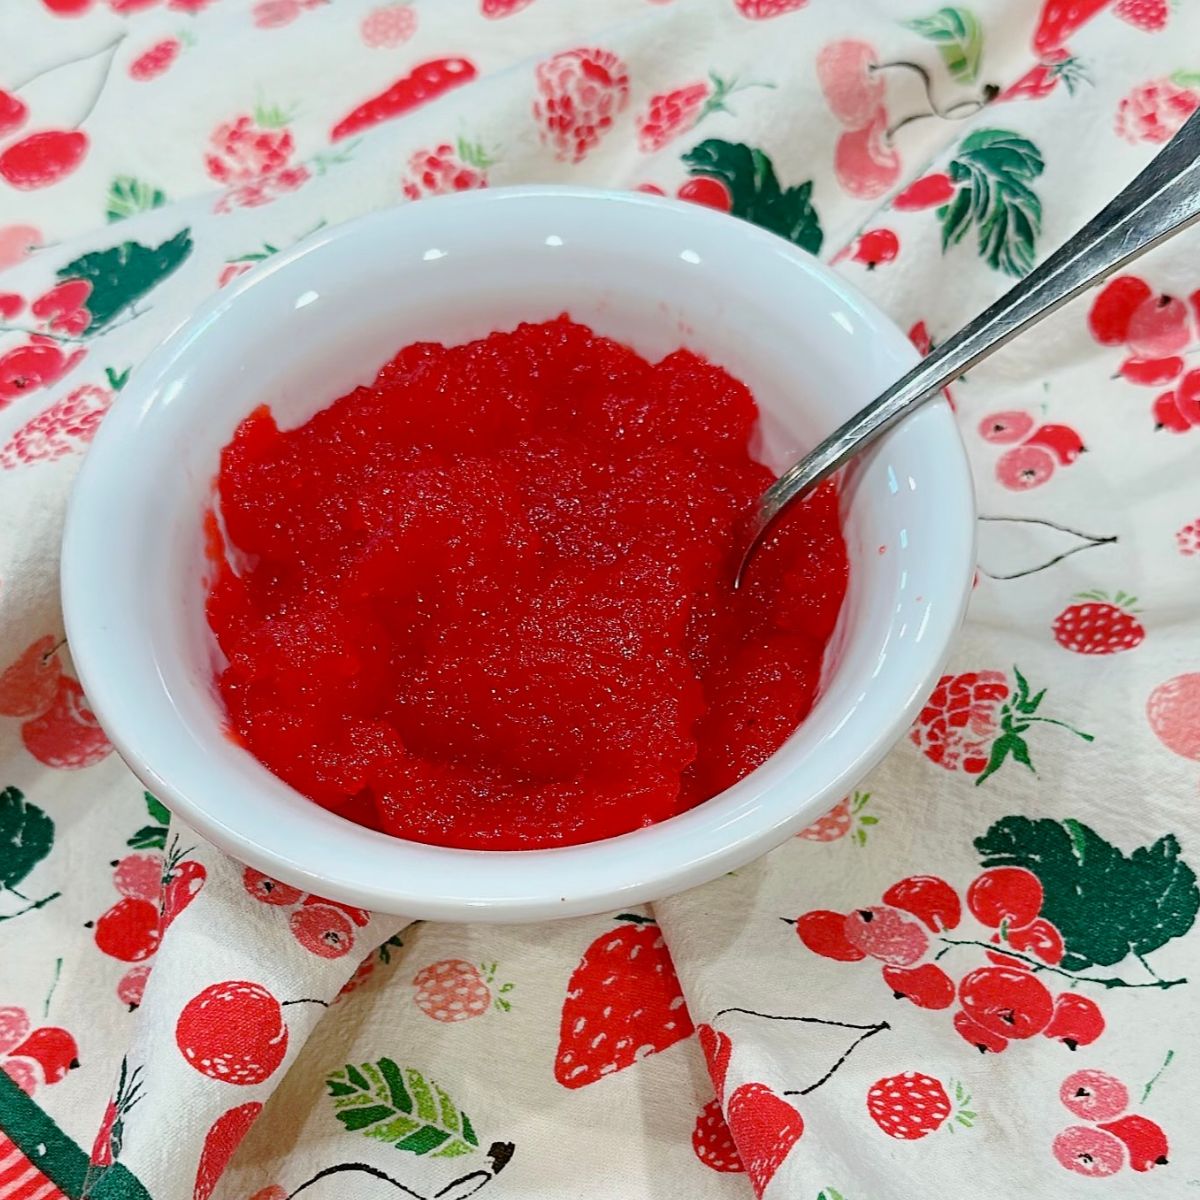 Serving of Applesauce Jello in a bowl.